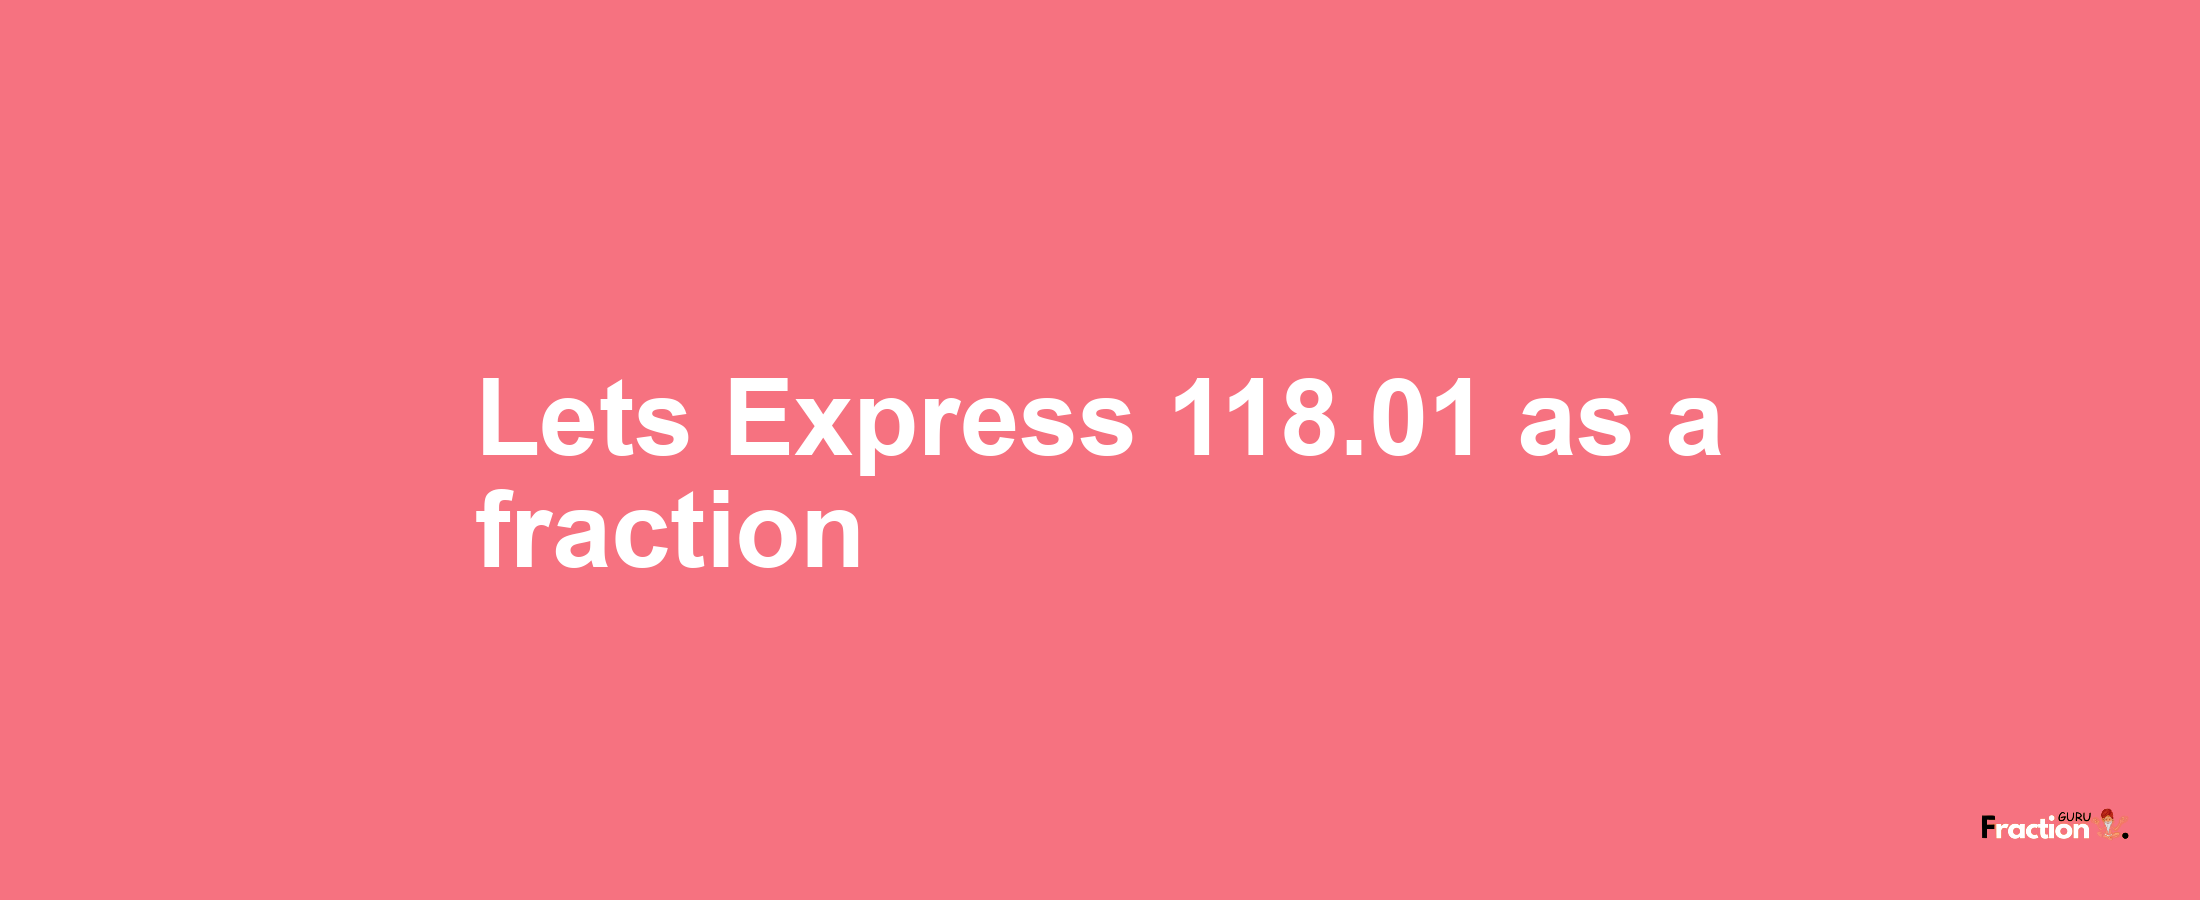 Lets Express 118.01 as afraction